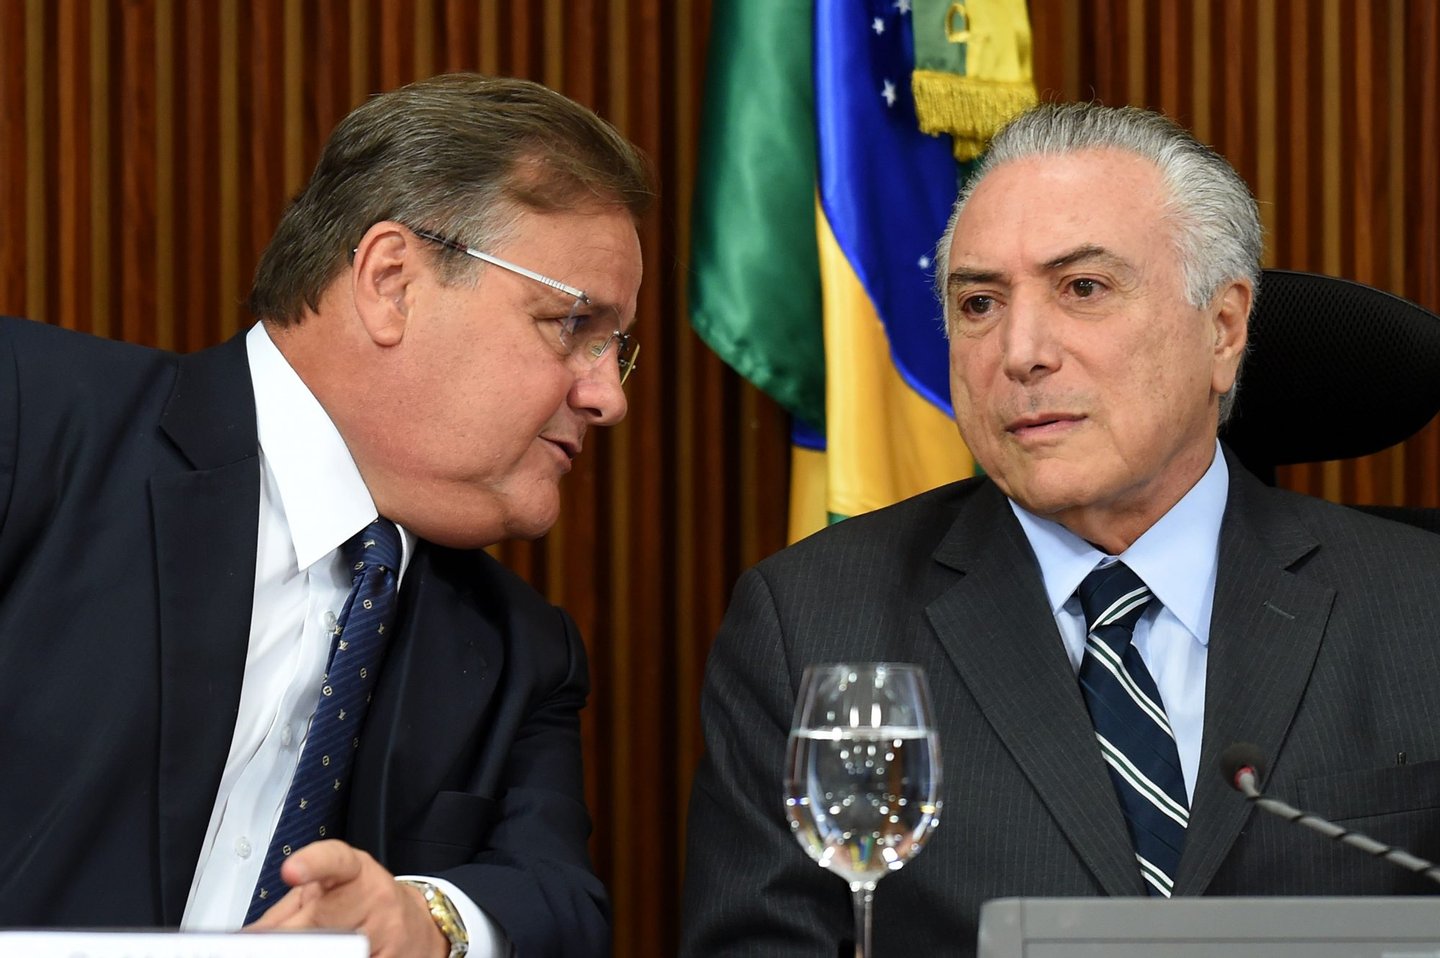 Brazilian acting President Michel Temer (R) and the General Secretary of the Brazilian Presidency Geddel Vieira Lima speak during a meeting with party leaders of the National Congress at Planalto Palace in Brasilia, on June 15, 2016. Temer is seeking support for the approval of a fiscal adjustment that he will send this week to the Congress. / AFP / EVARISTO SA (Photo credit should read EVARISTO SA/AFP/Getty Images)